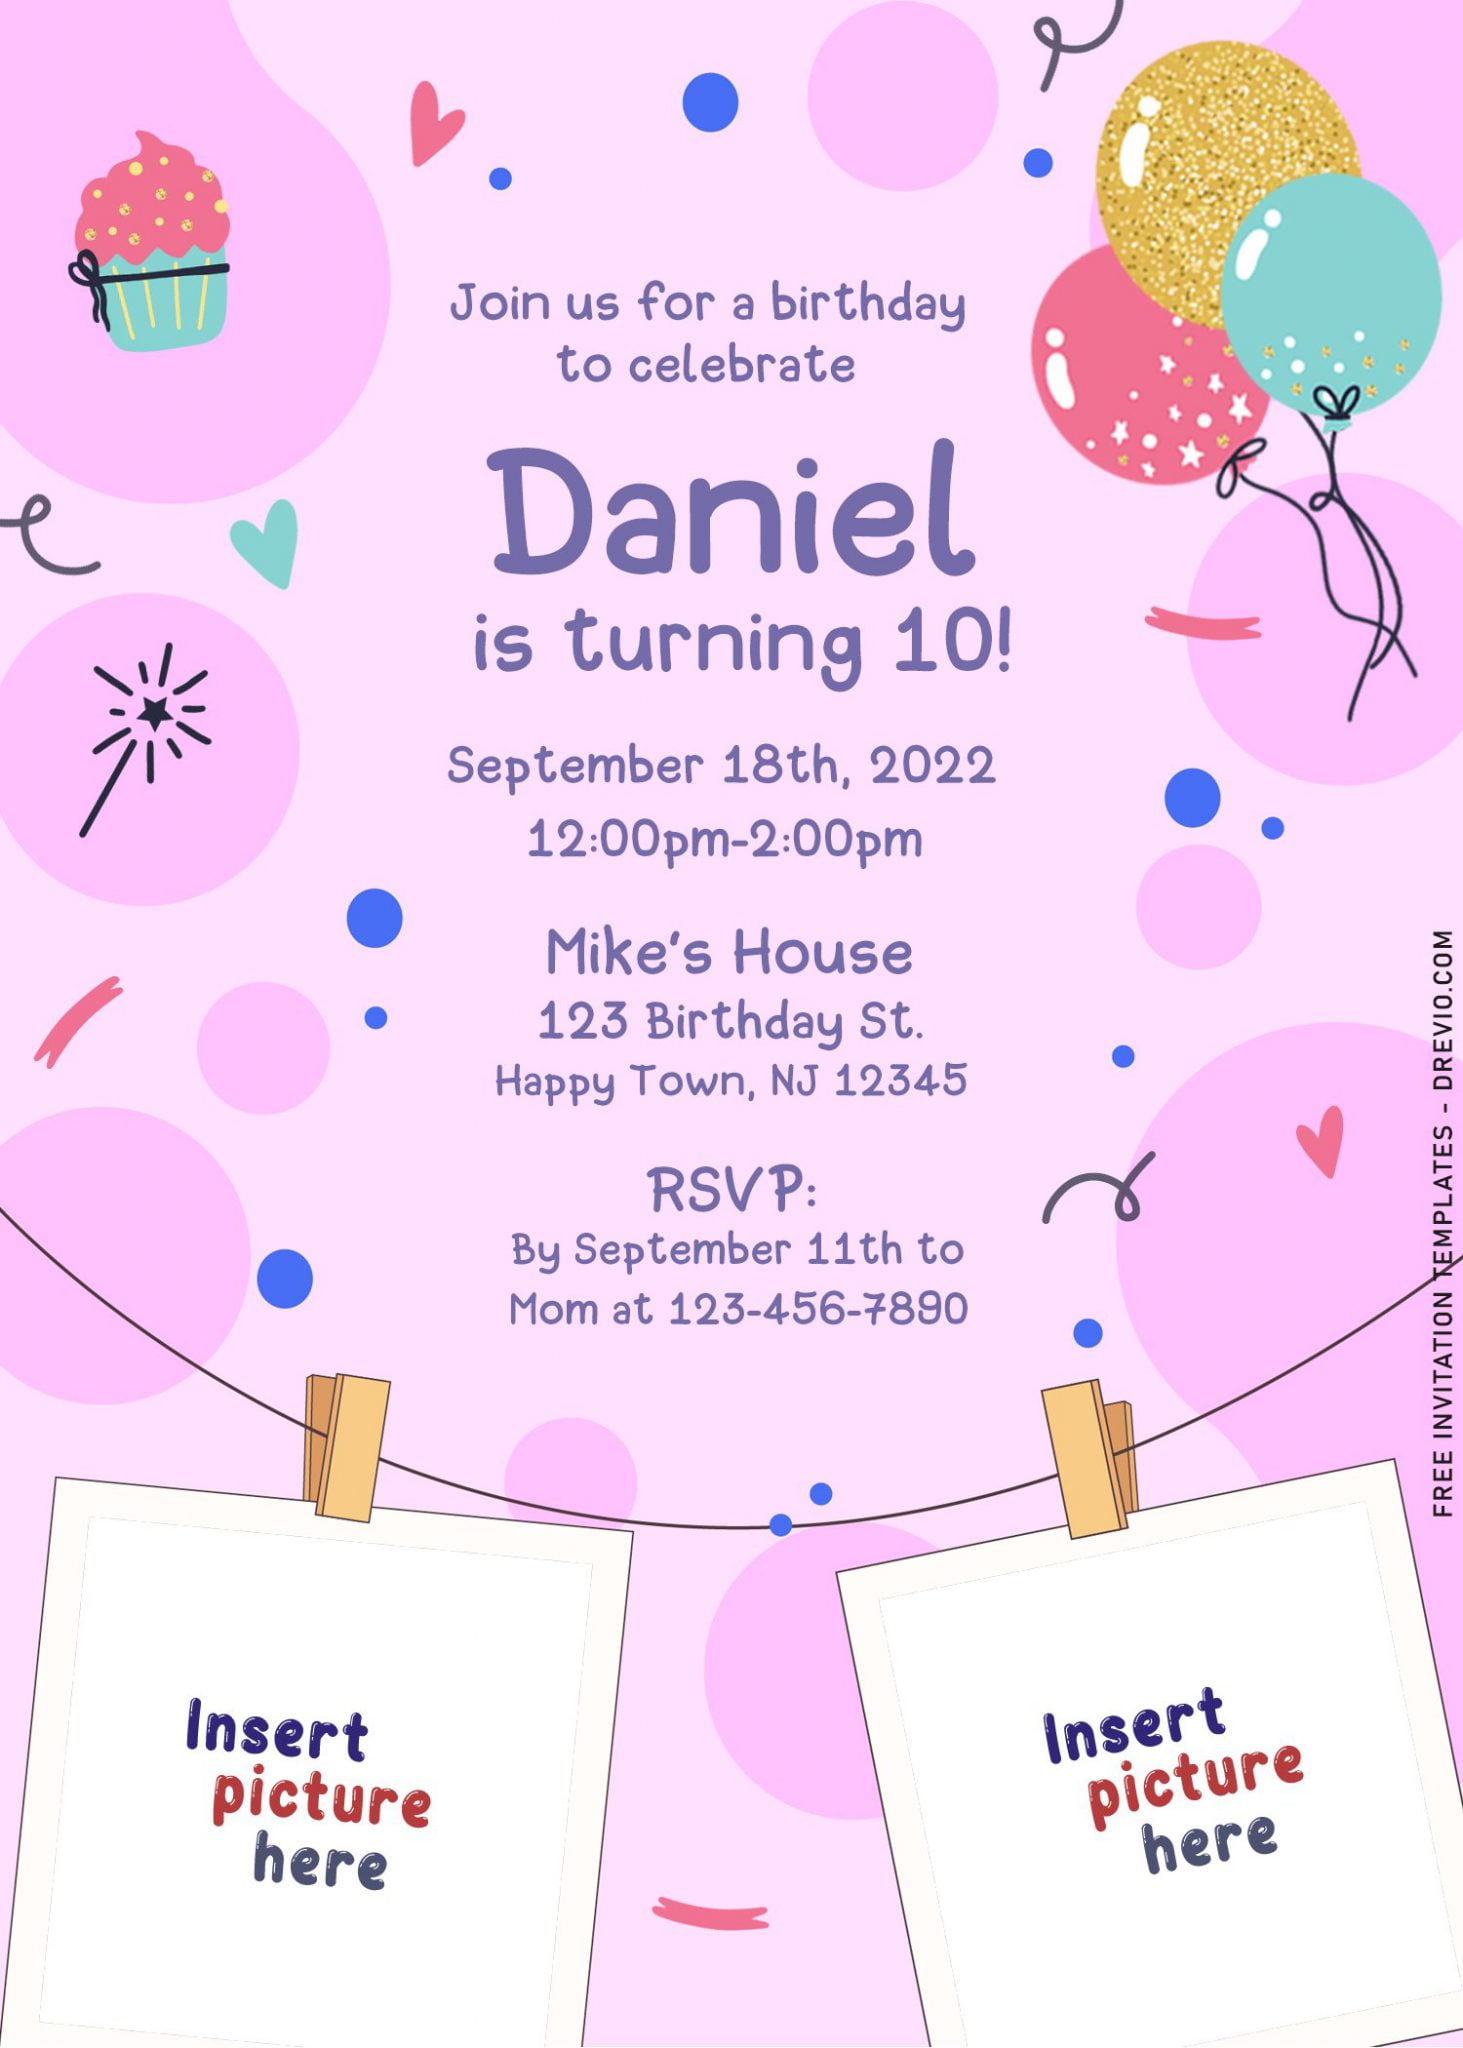 11-fun-kids-birthday-invitation-templates-for-your-kid-s-upcoming-birthday-download-hundreds